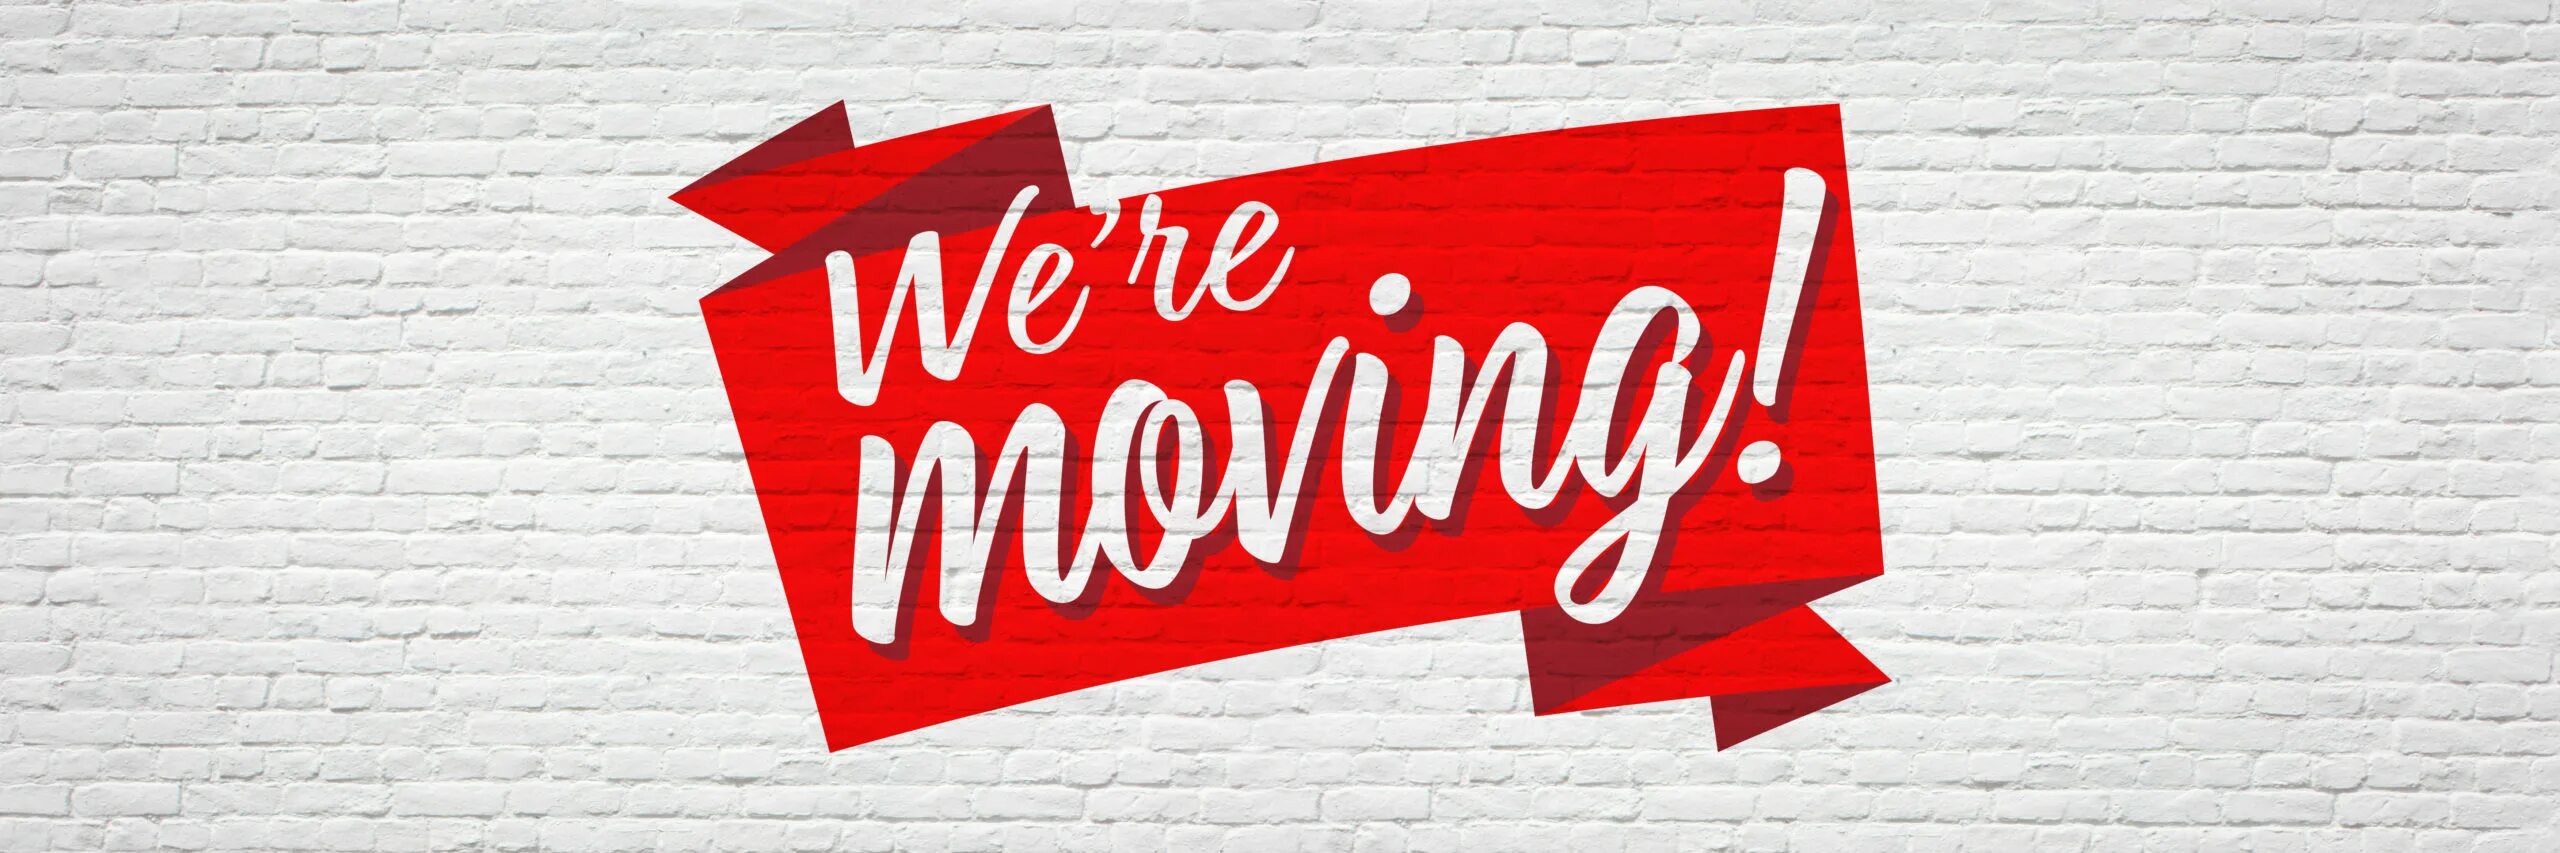 We are moving. Moove картинка. Move картинка с надписью. Be moved. We have moved to a new